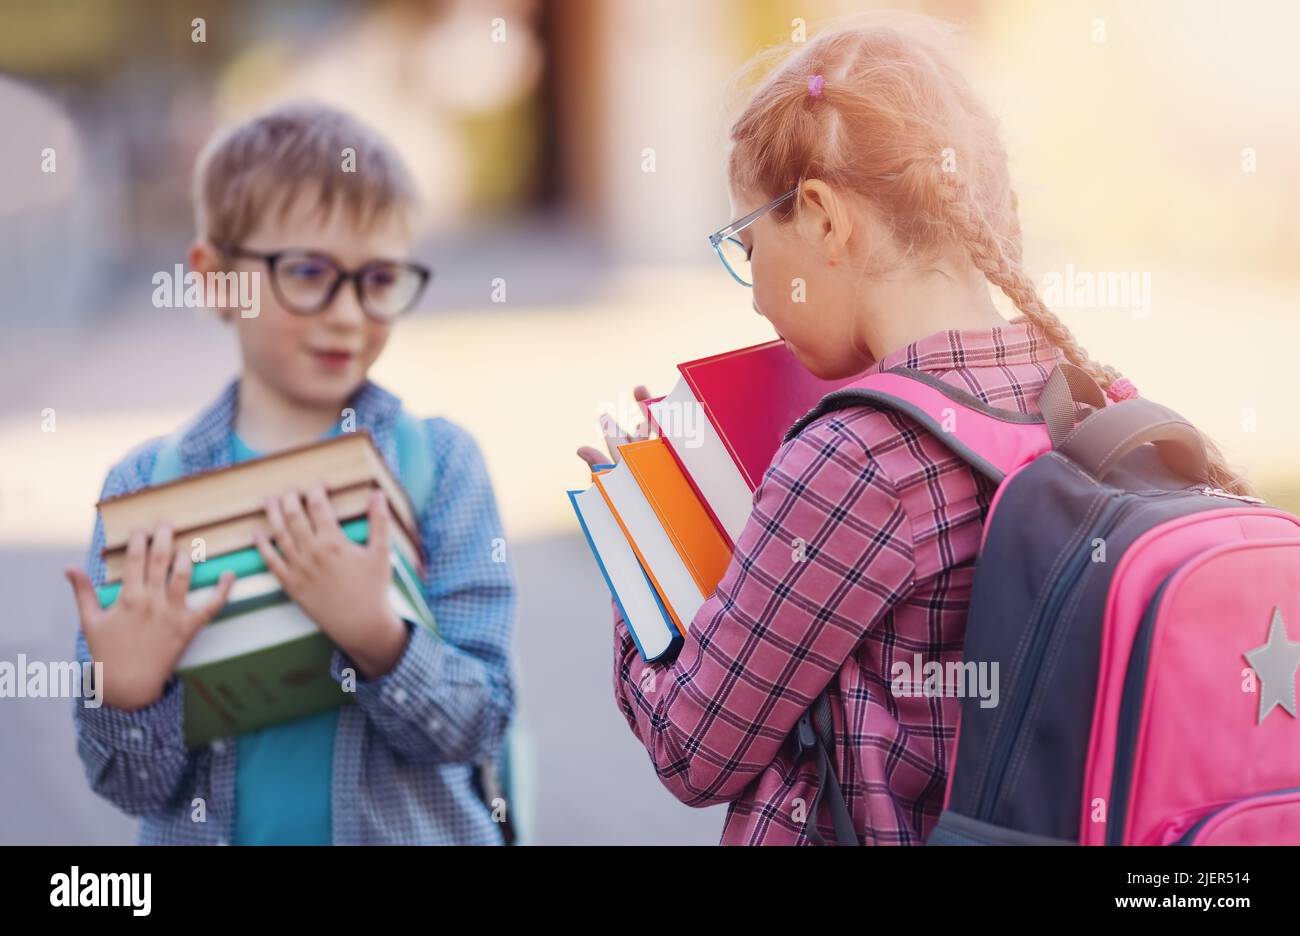 Girl and boy in glasses standing with books in their hands. Stock Photo